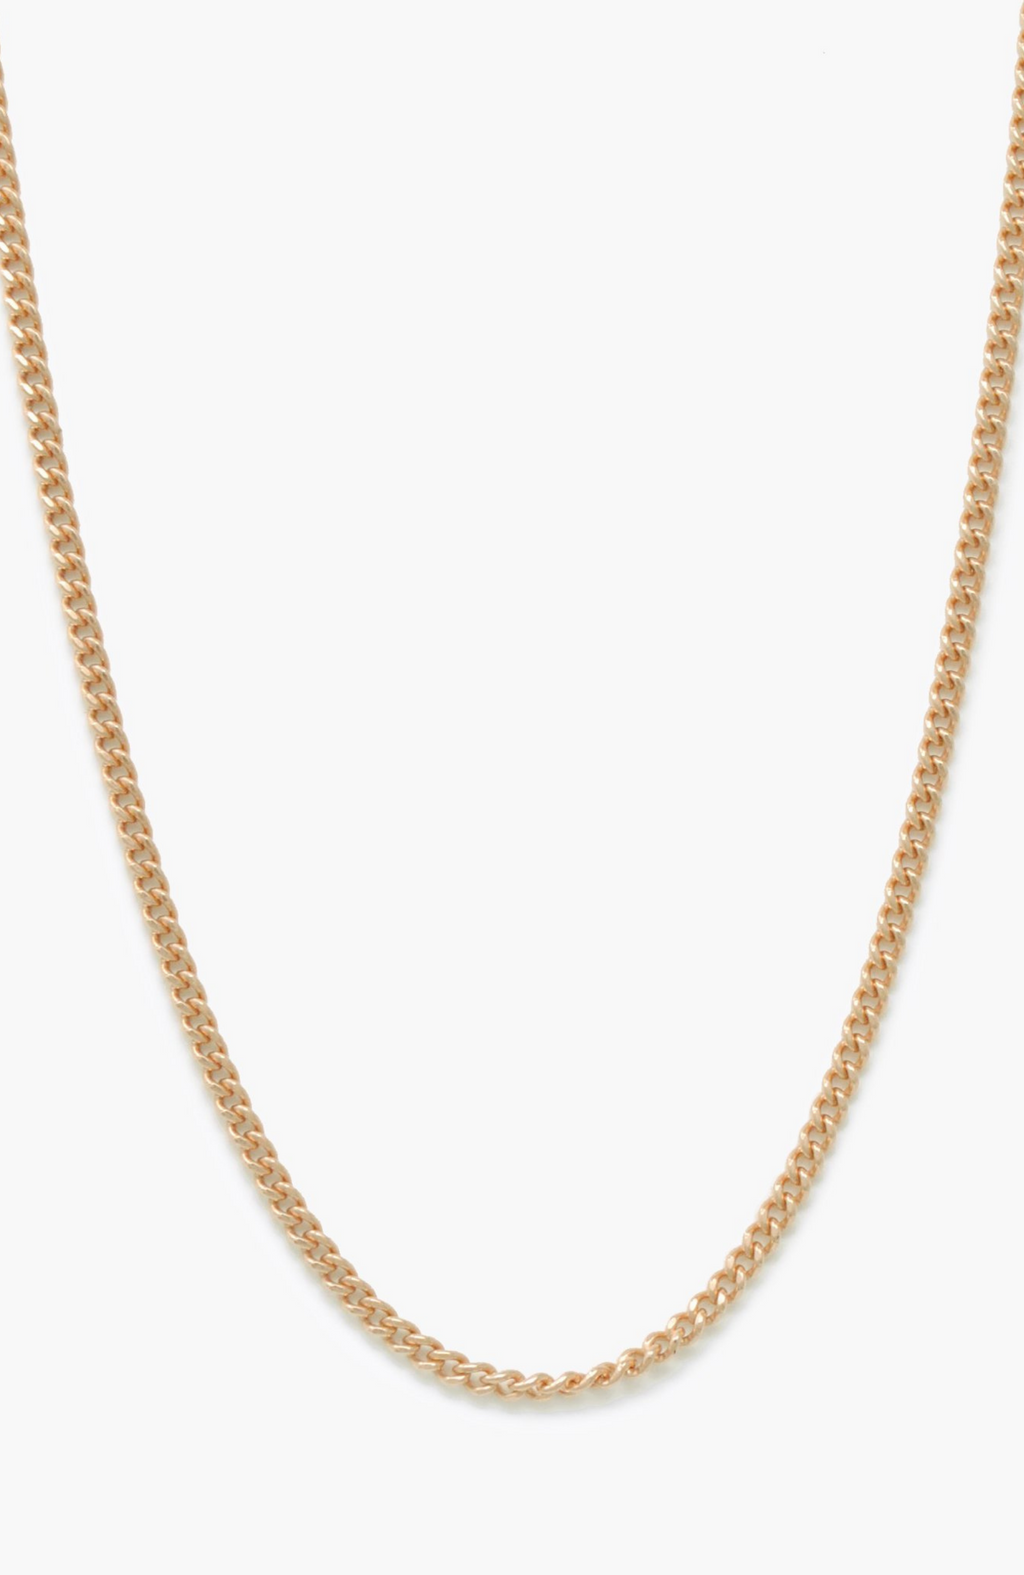 Able - Curb Chain Necklace